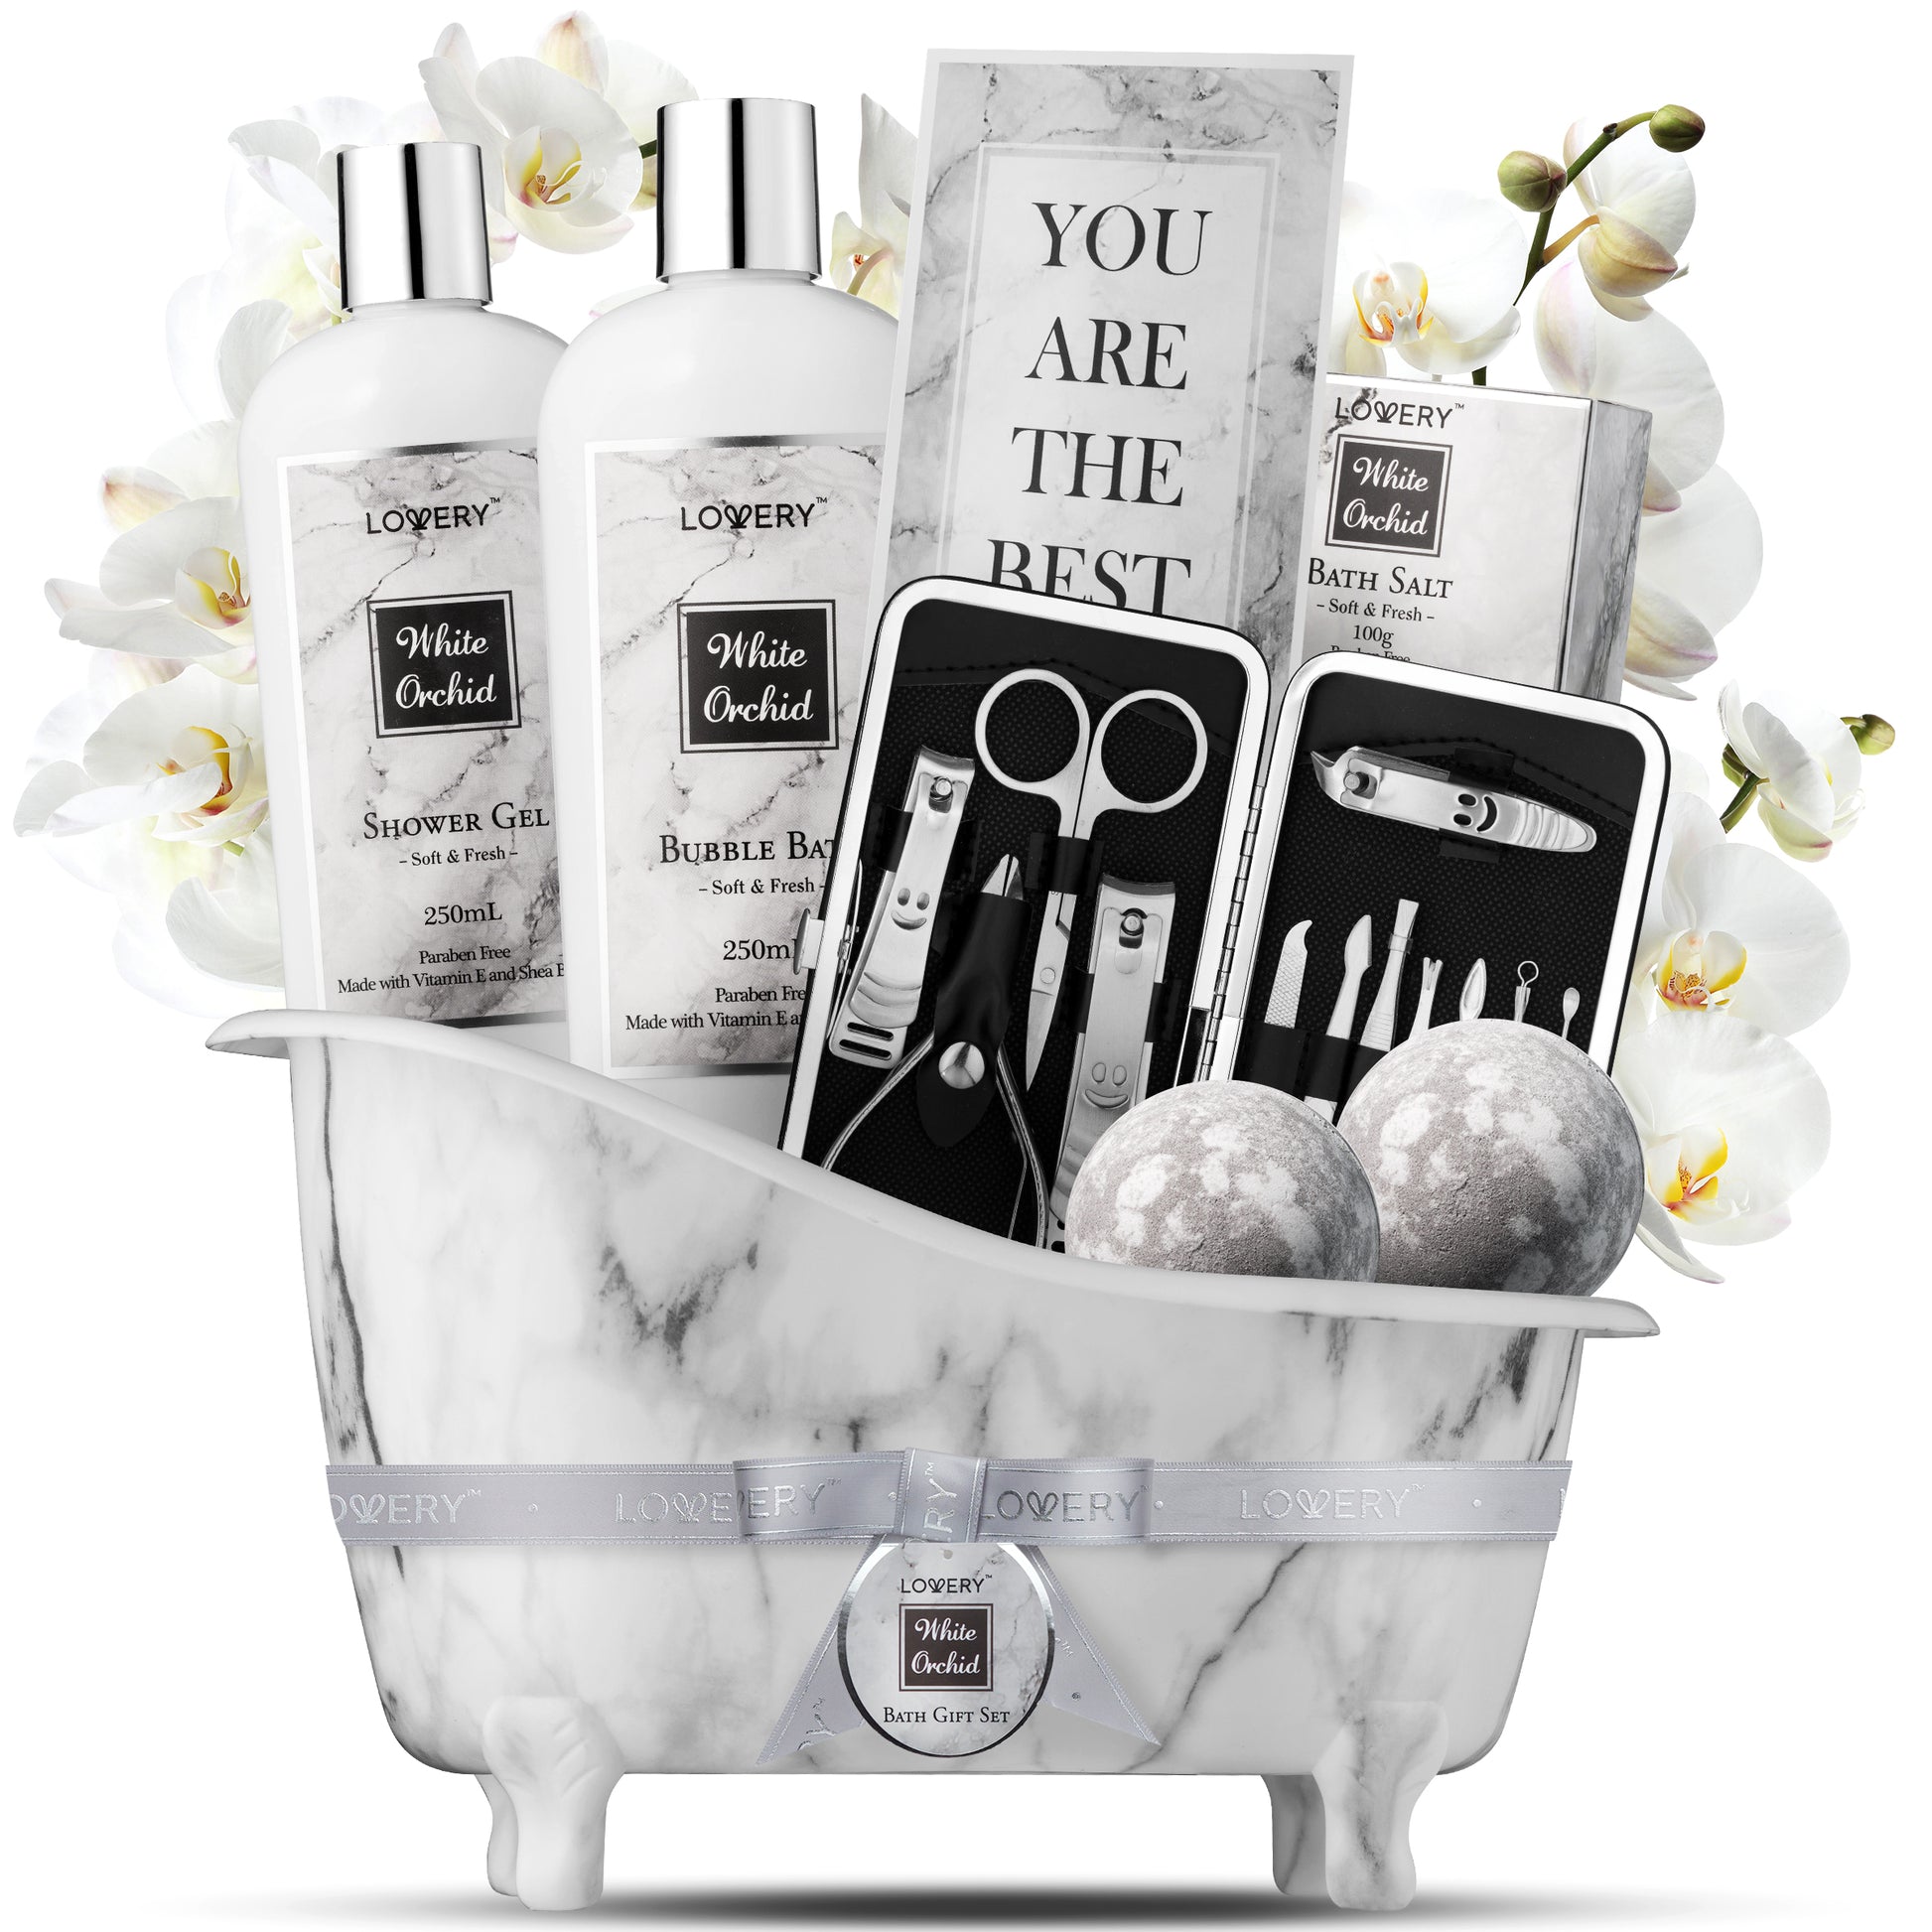 Lovery - White Orchid Self Care Kit - 20pc Personalized Gifts